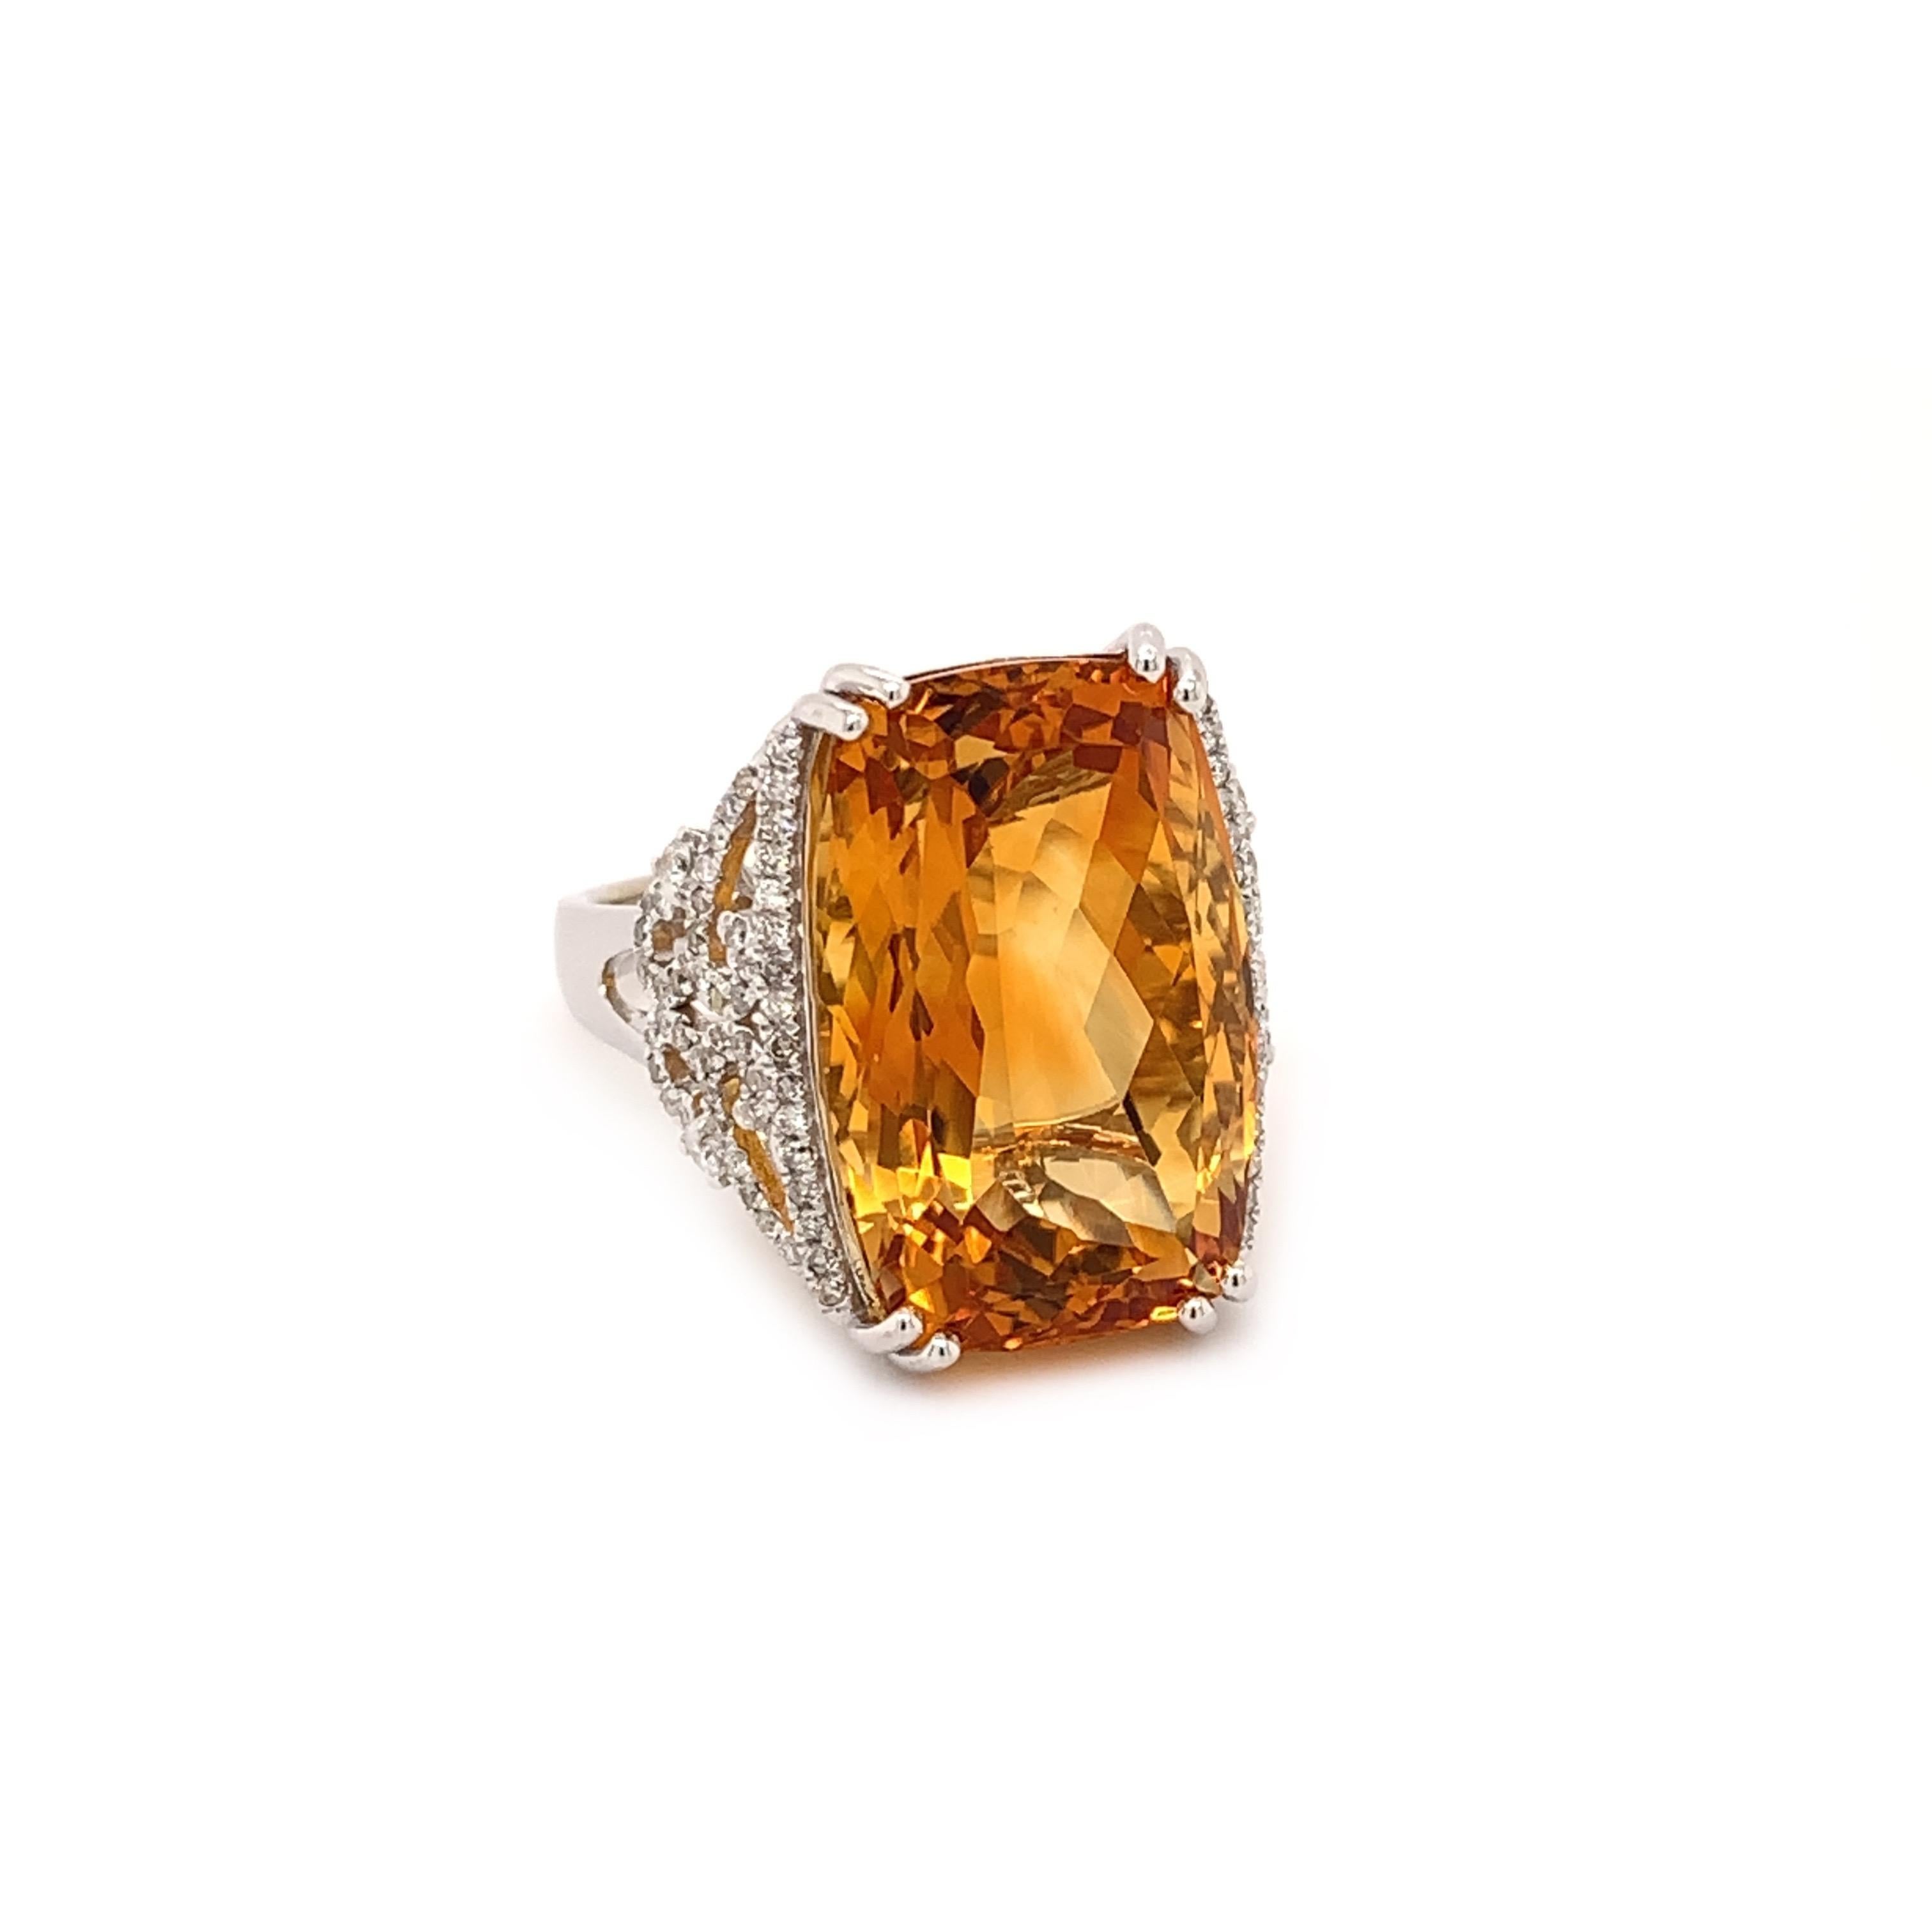 Stunning citrine diamond cocktail ring. High brilliance, deep golden honey tone, transparent clean, rectangular mix cut with diamond cut bottom, natural 14.60 carats citrine mounted in high profile open basket with eight bead prongs, accented with